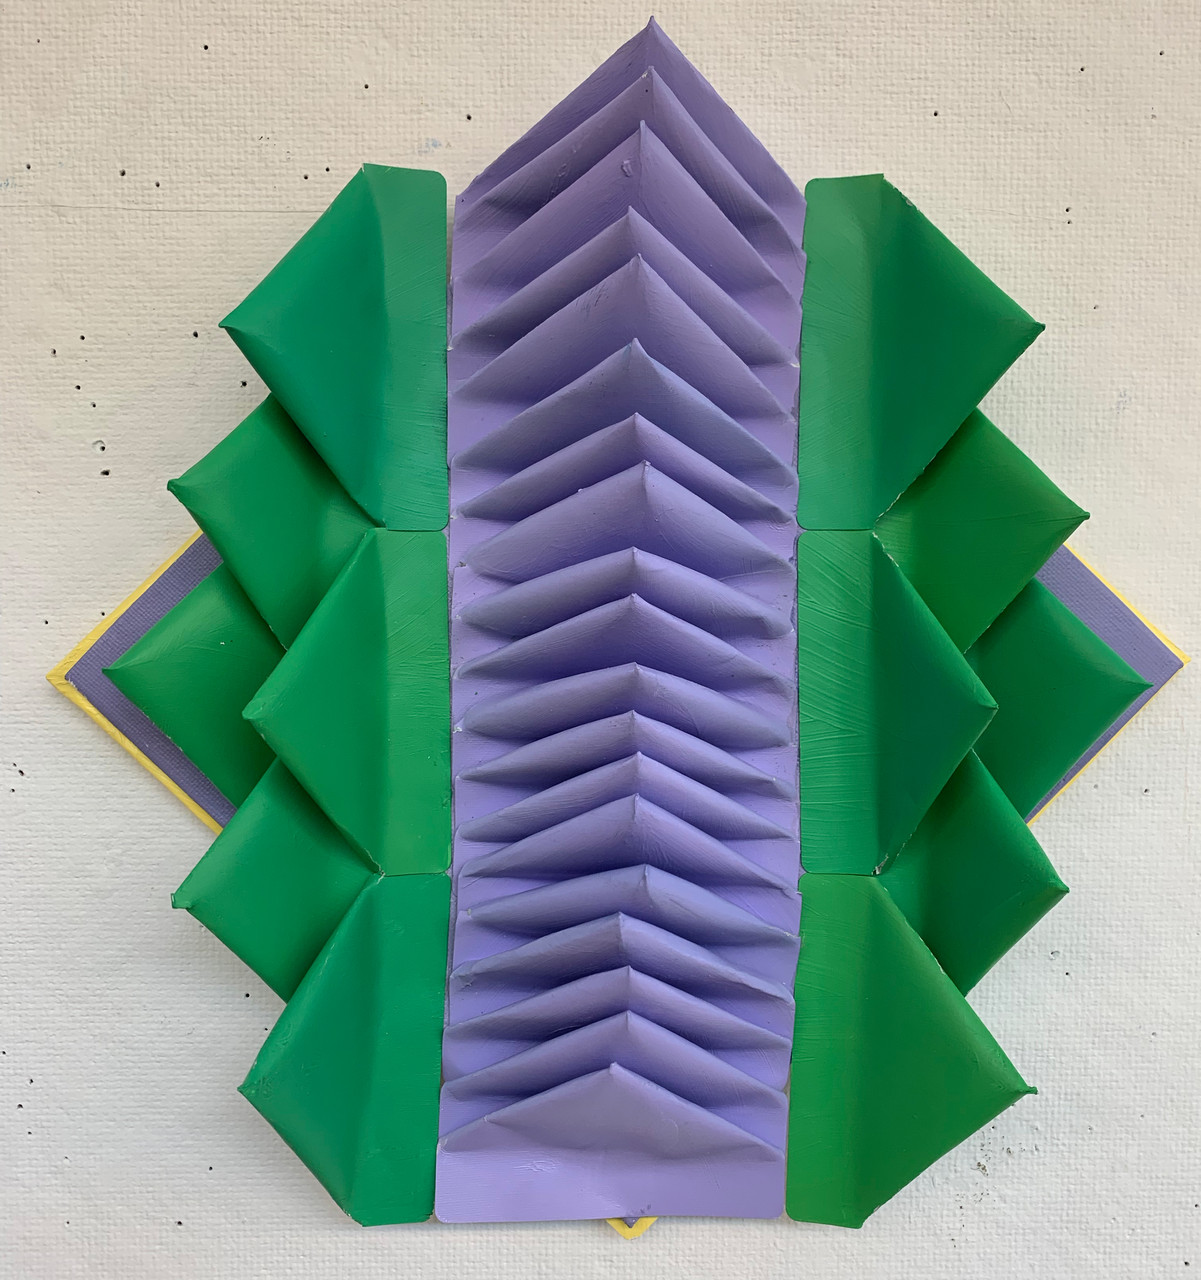 A sculpture composed of multiple purple triangles in a row surrounded by rows of green, purple, and yellow triangles